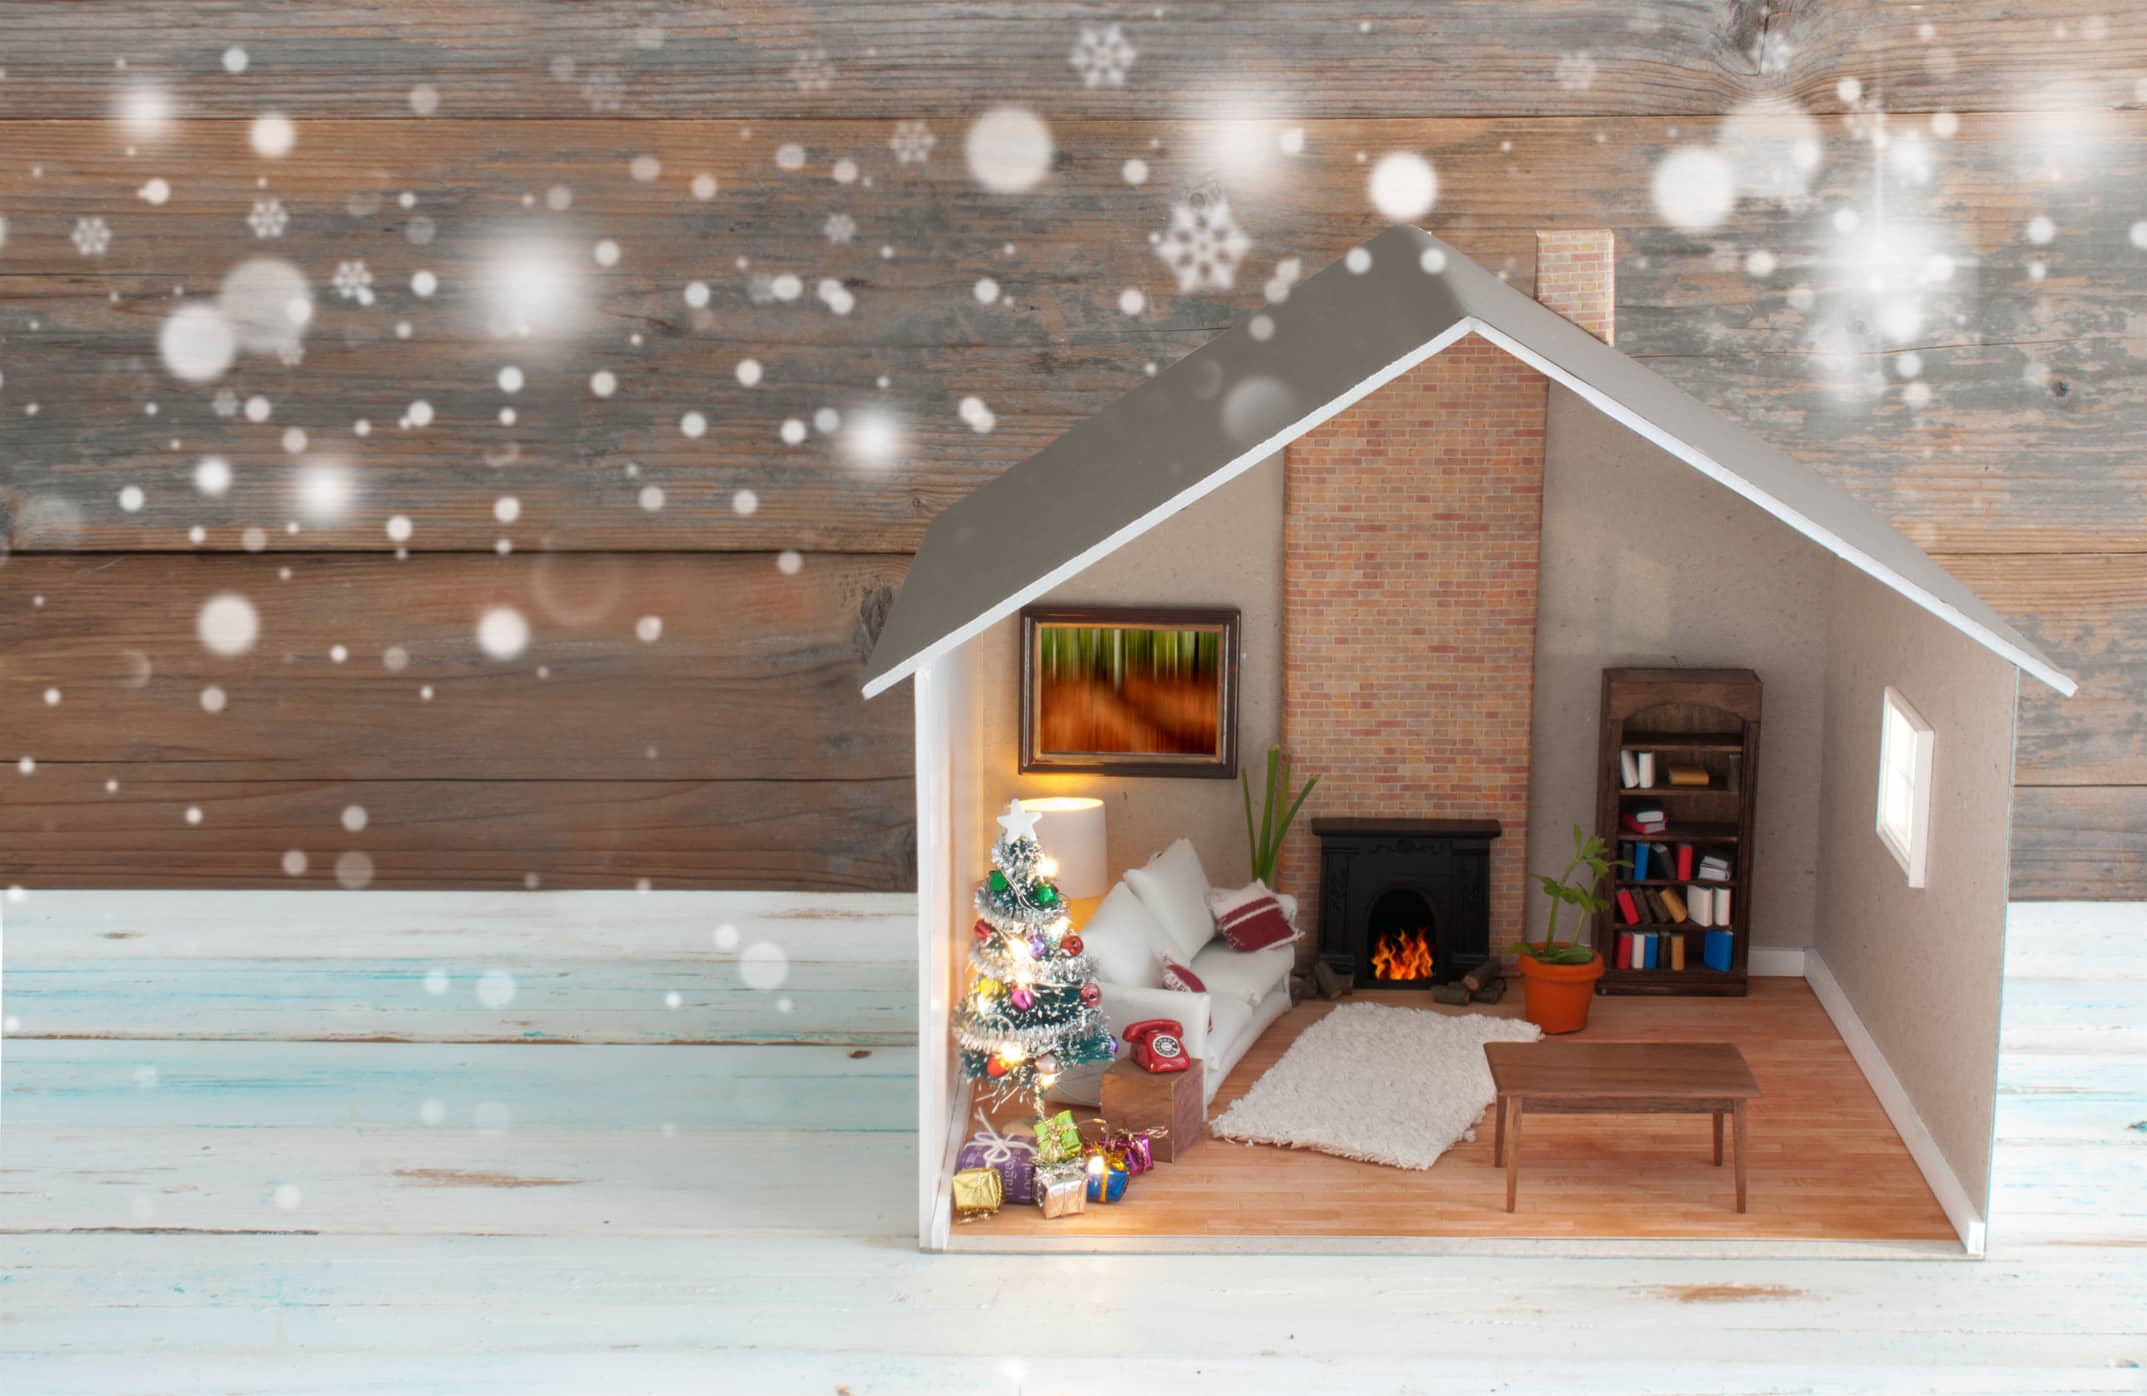 A miniature house is surrounded with snow and decorated for the holidays